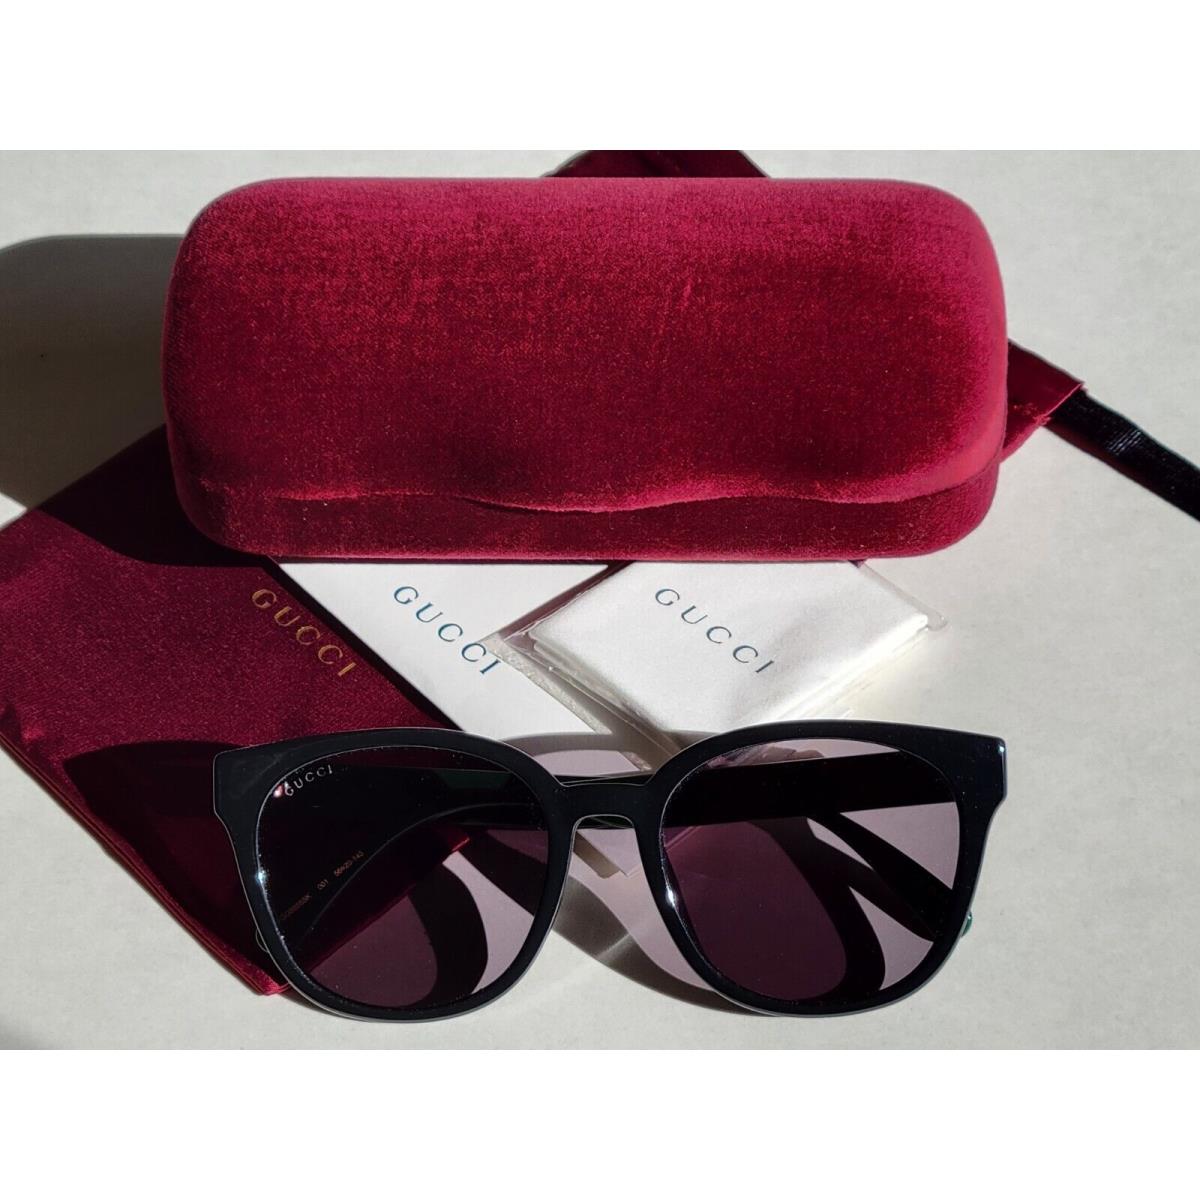 Gucci Women`s Black with Red/green Temples Designer Sunglass Frames - Frame: Black with Red and Green, Lens: Grey